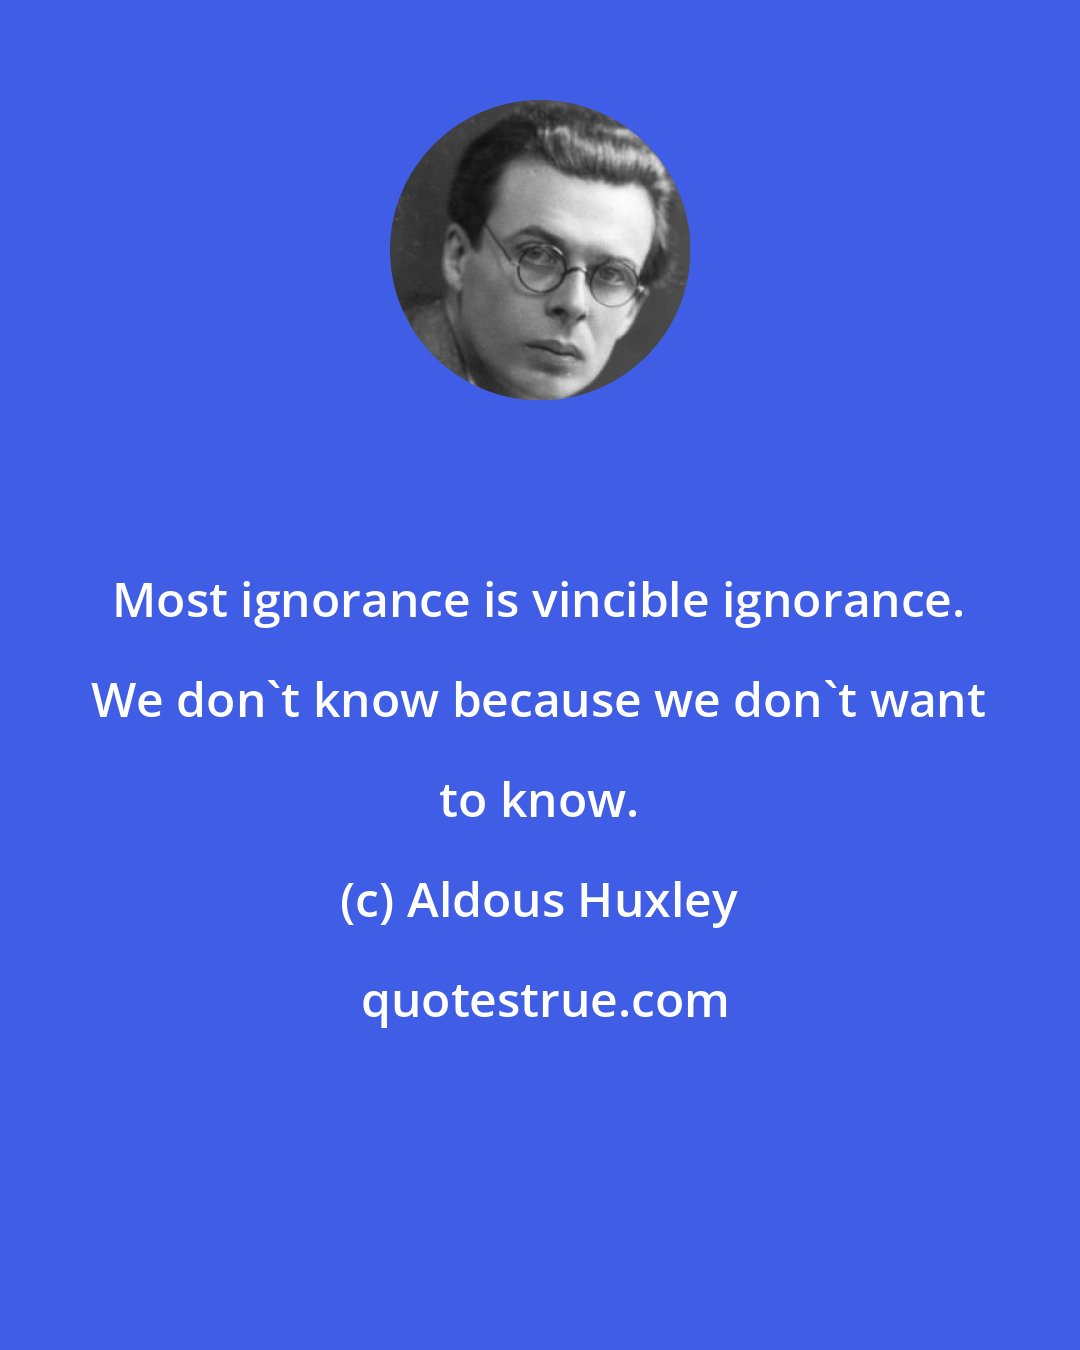 Aldous Huxley: Most ignorance is vincible ignorance. We don't know because we don't want to know.